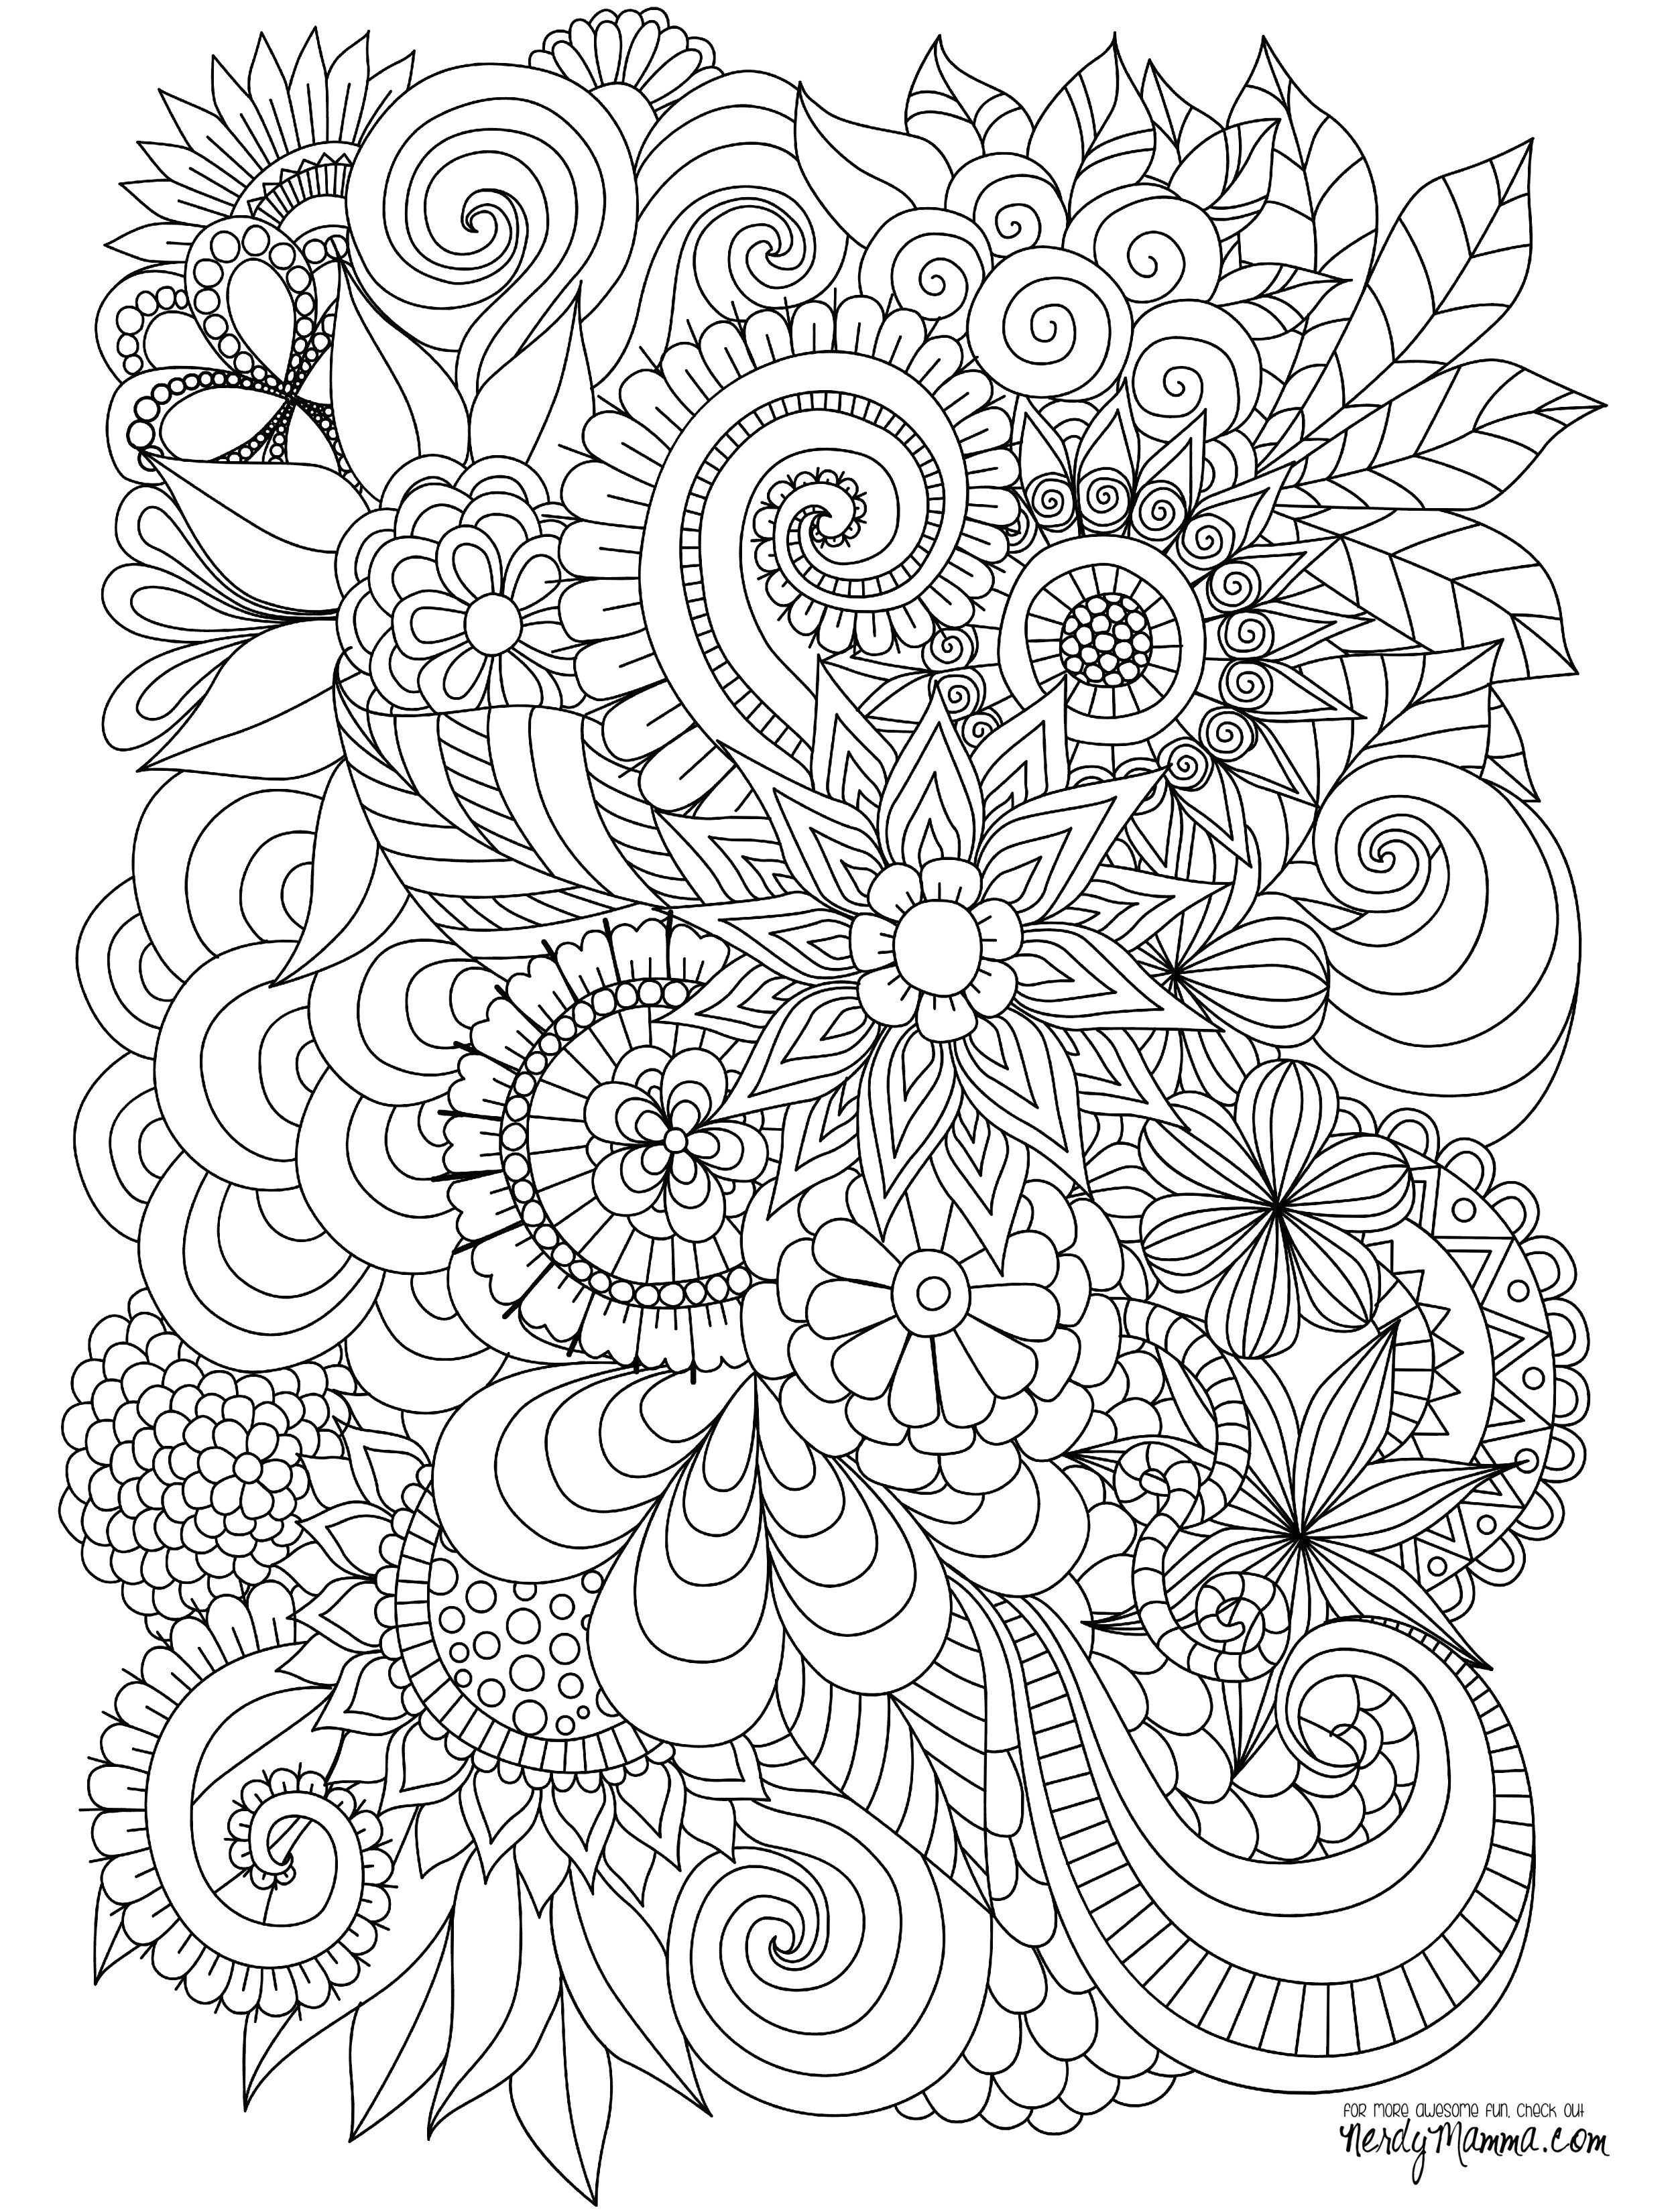 Drawing Pictures Of Flowers for Colouring Flowers Abstract Coloring Pages Colouring Adult Detailed Advanced